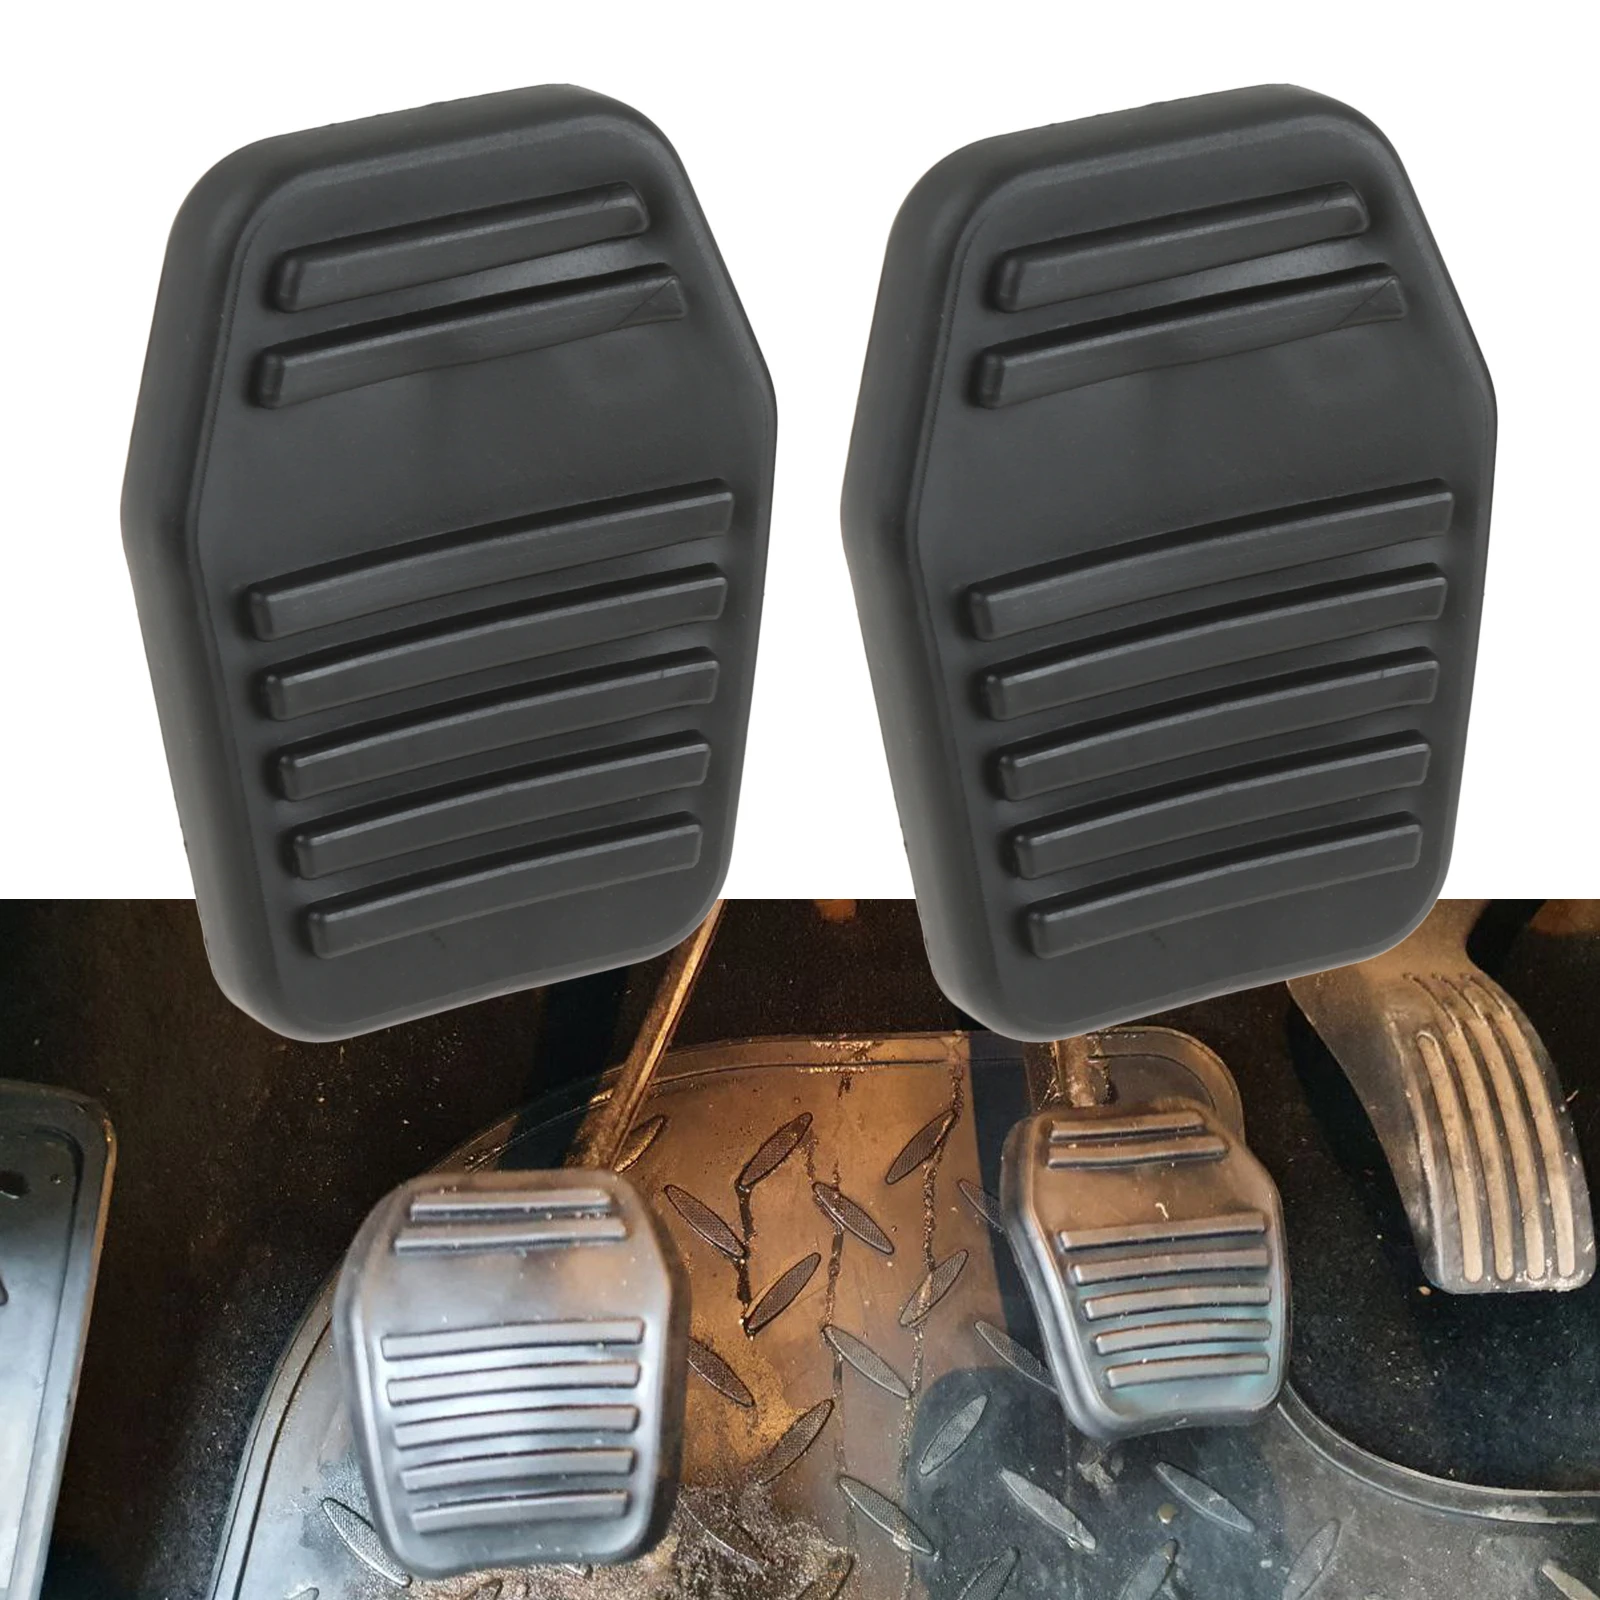 2Pcs Rubber Brake Clutch Foot Pedal Pad Covers 6789917 For Ford Focus MK1 Fusion JU Mondeo MK3 Scorpio Fiesta 5 Transit Connect